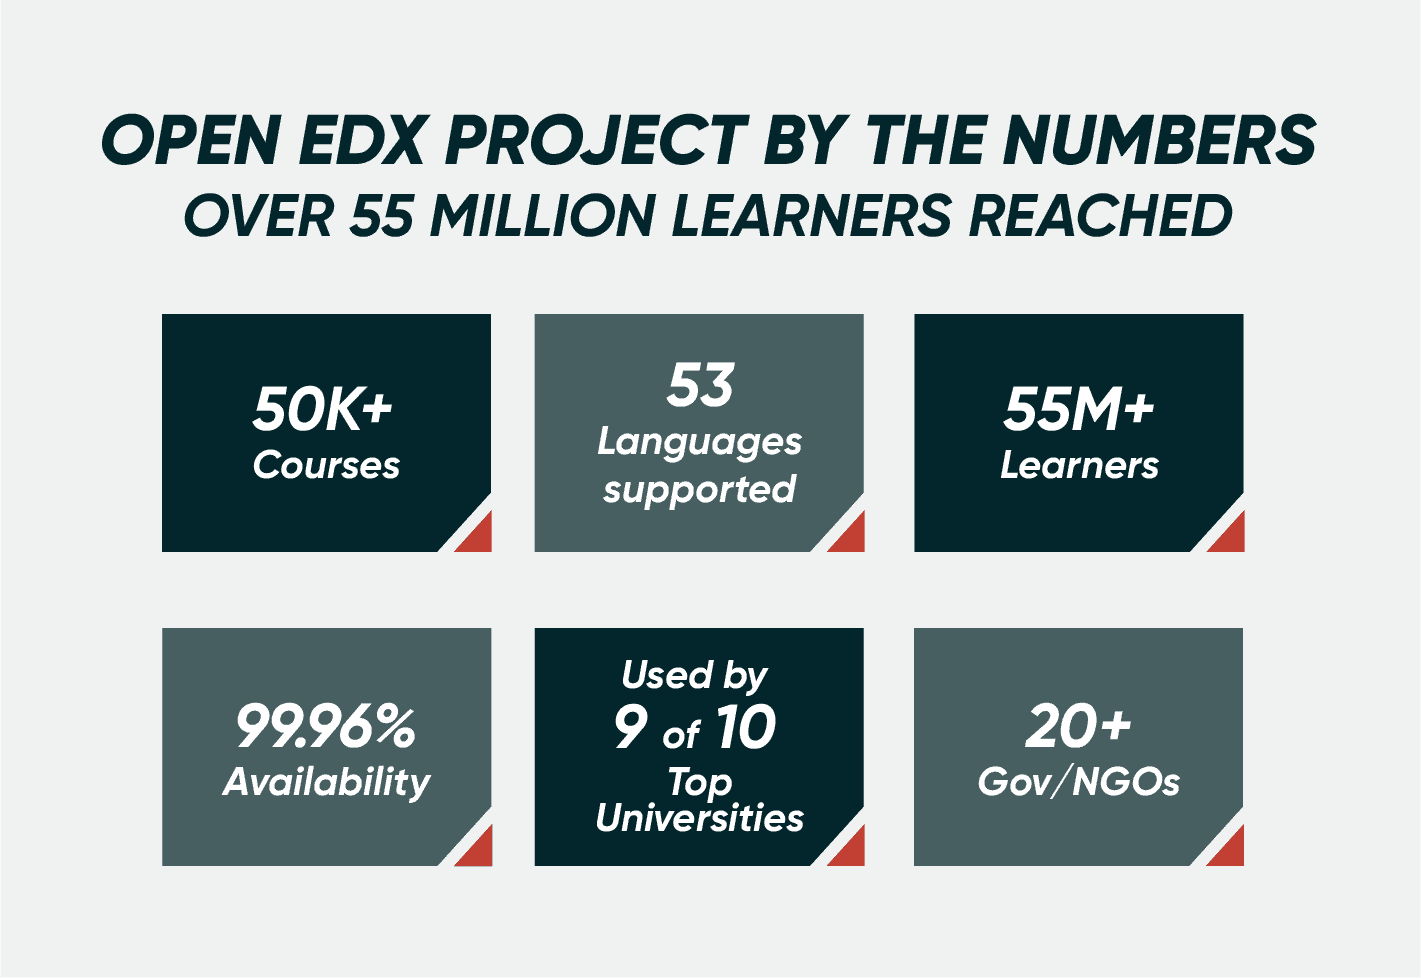 Facts about the Open edX